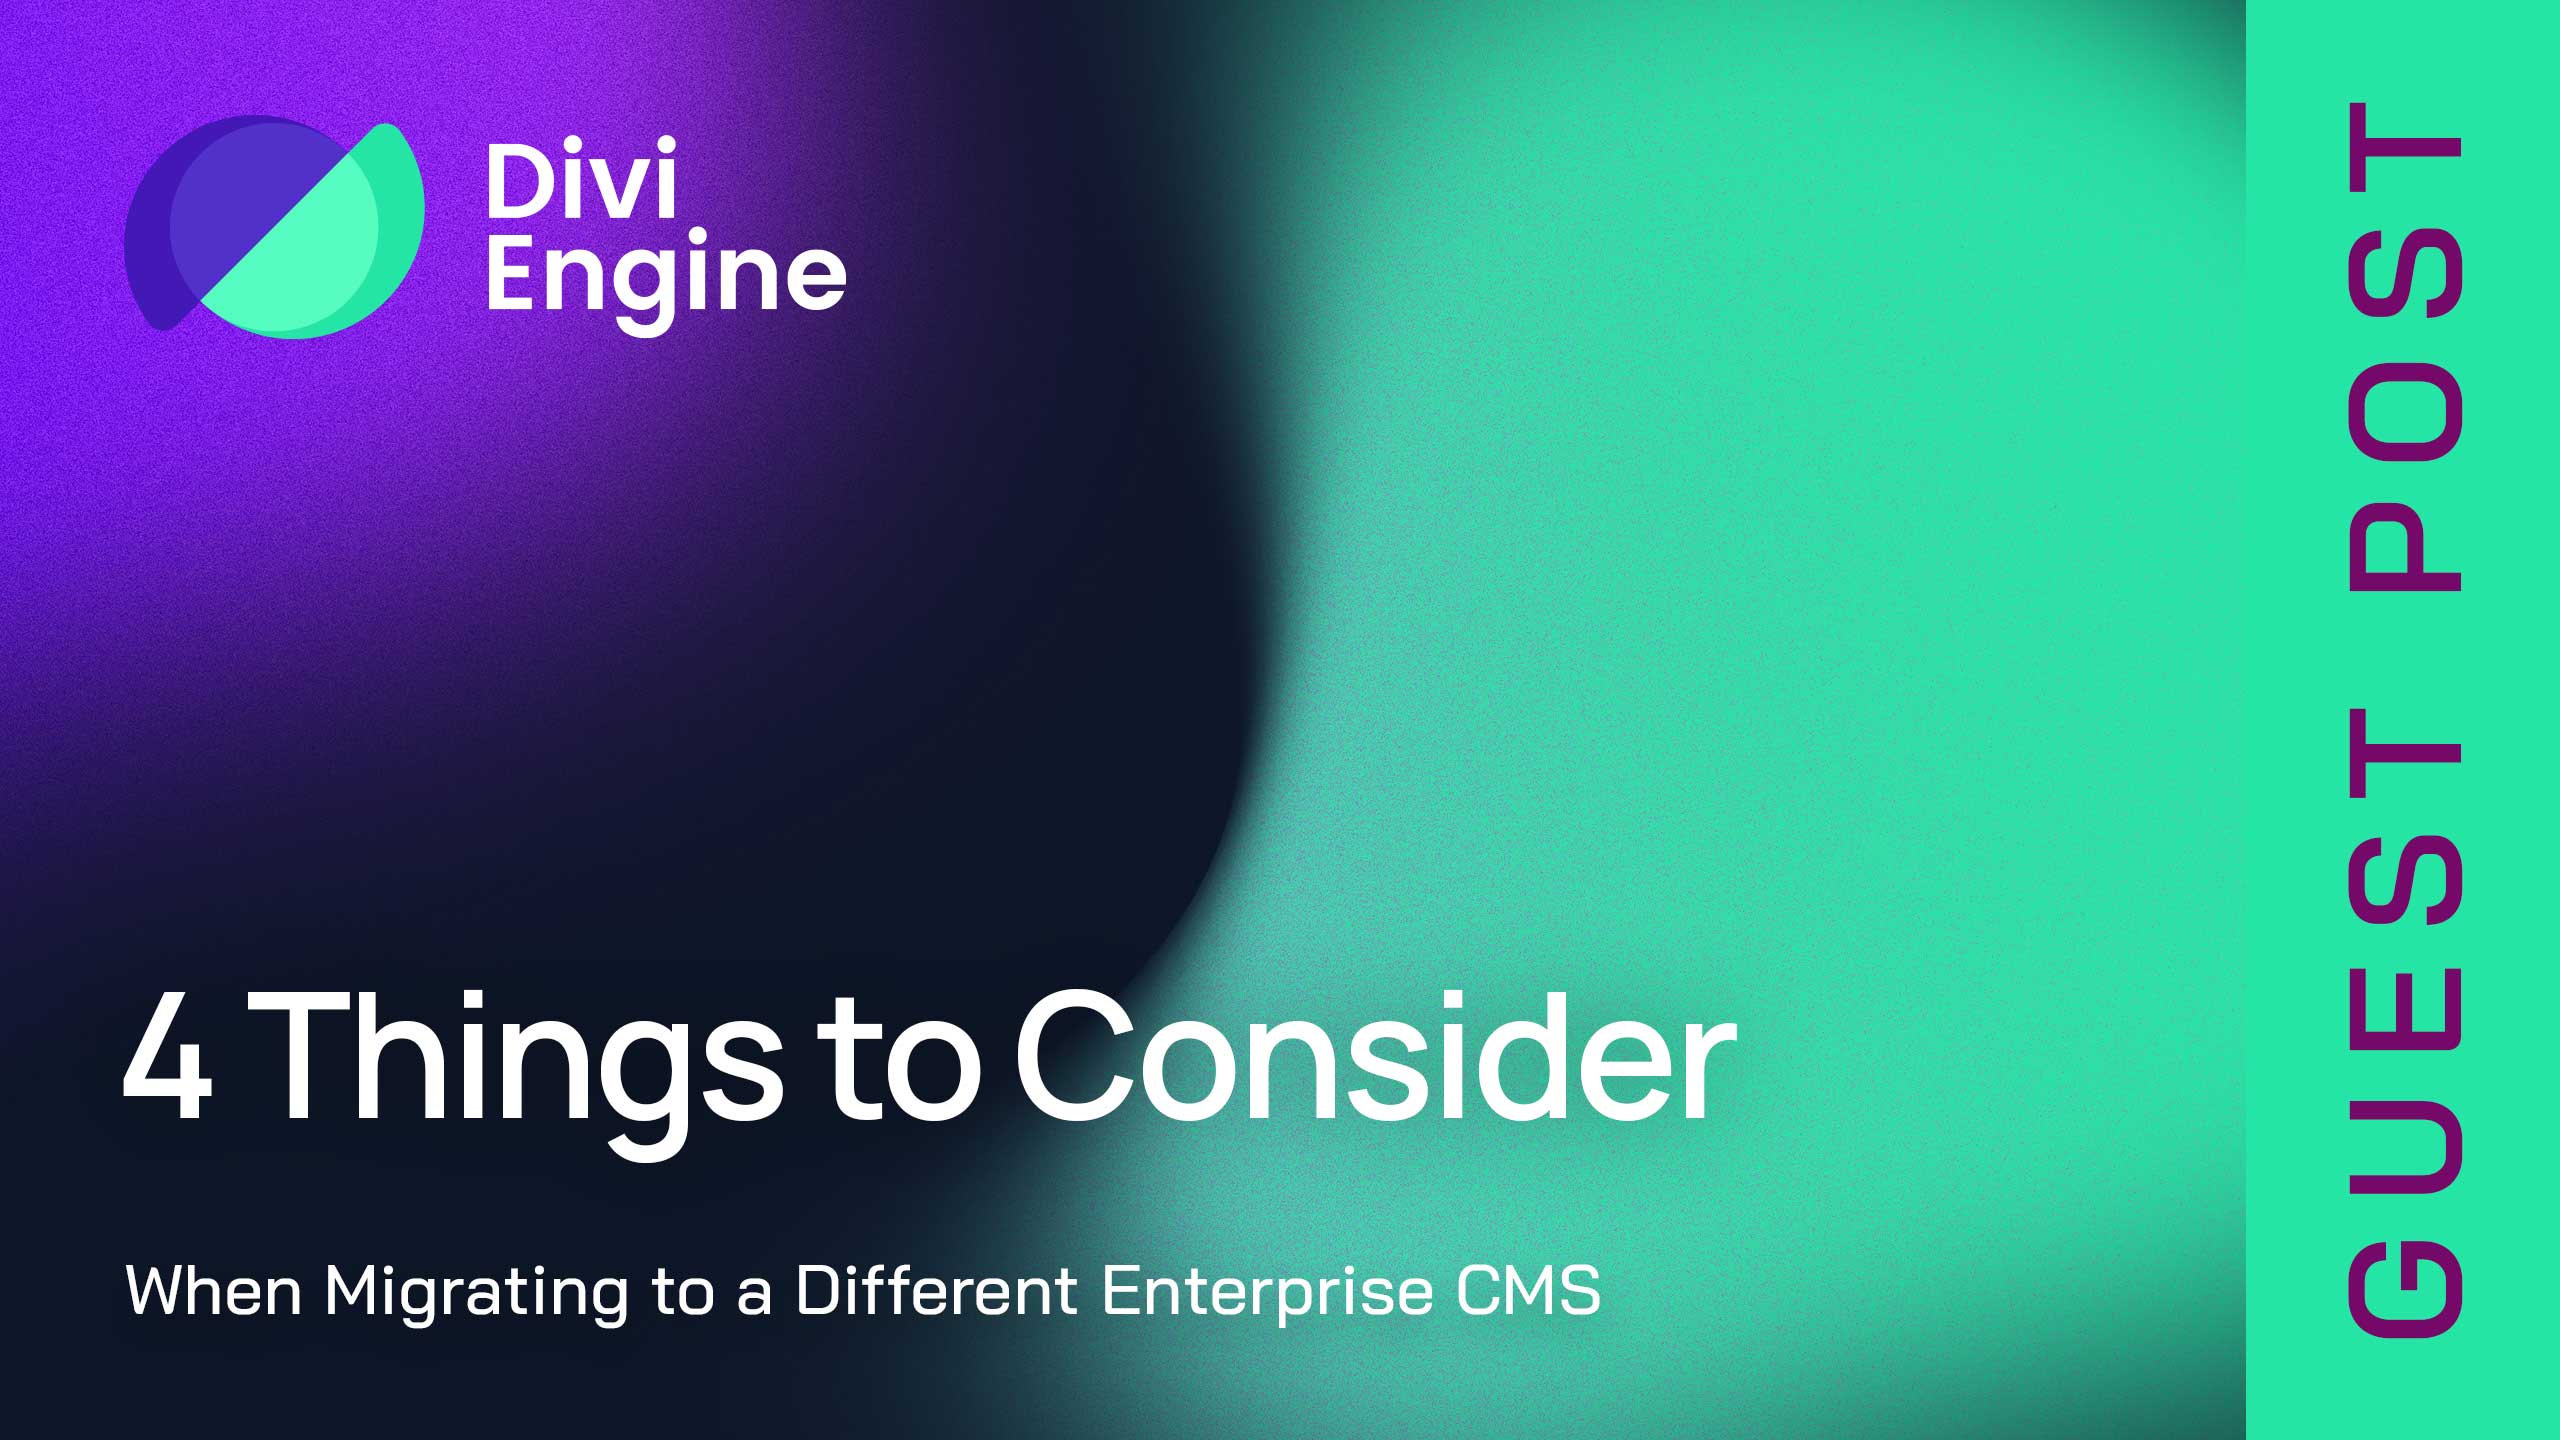 Migrating to a Different Enterprise CMS: 4 Things to Consider